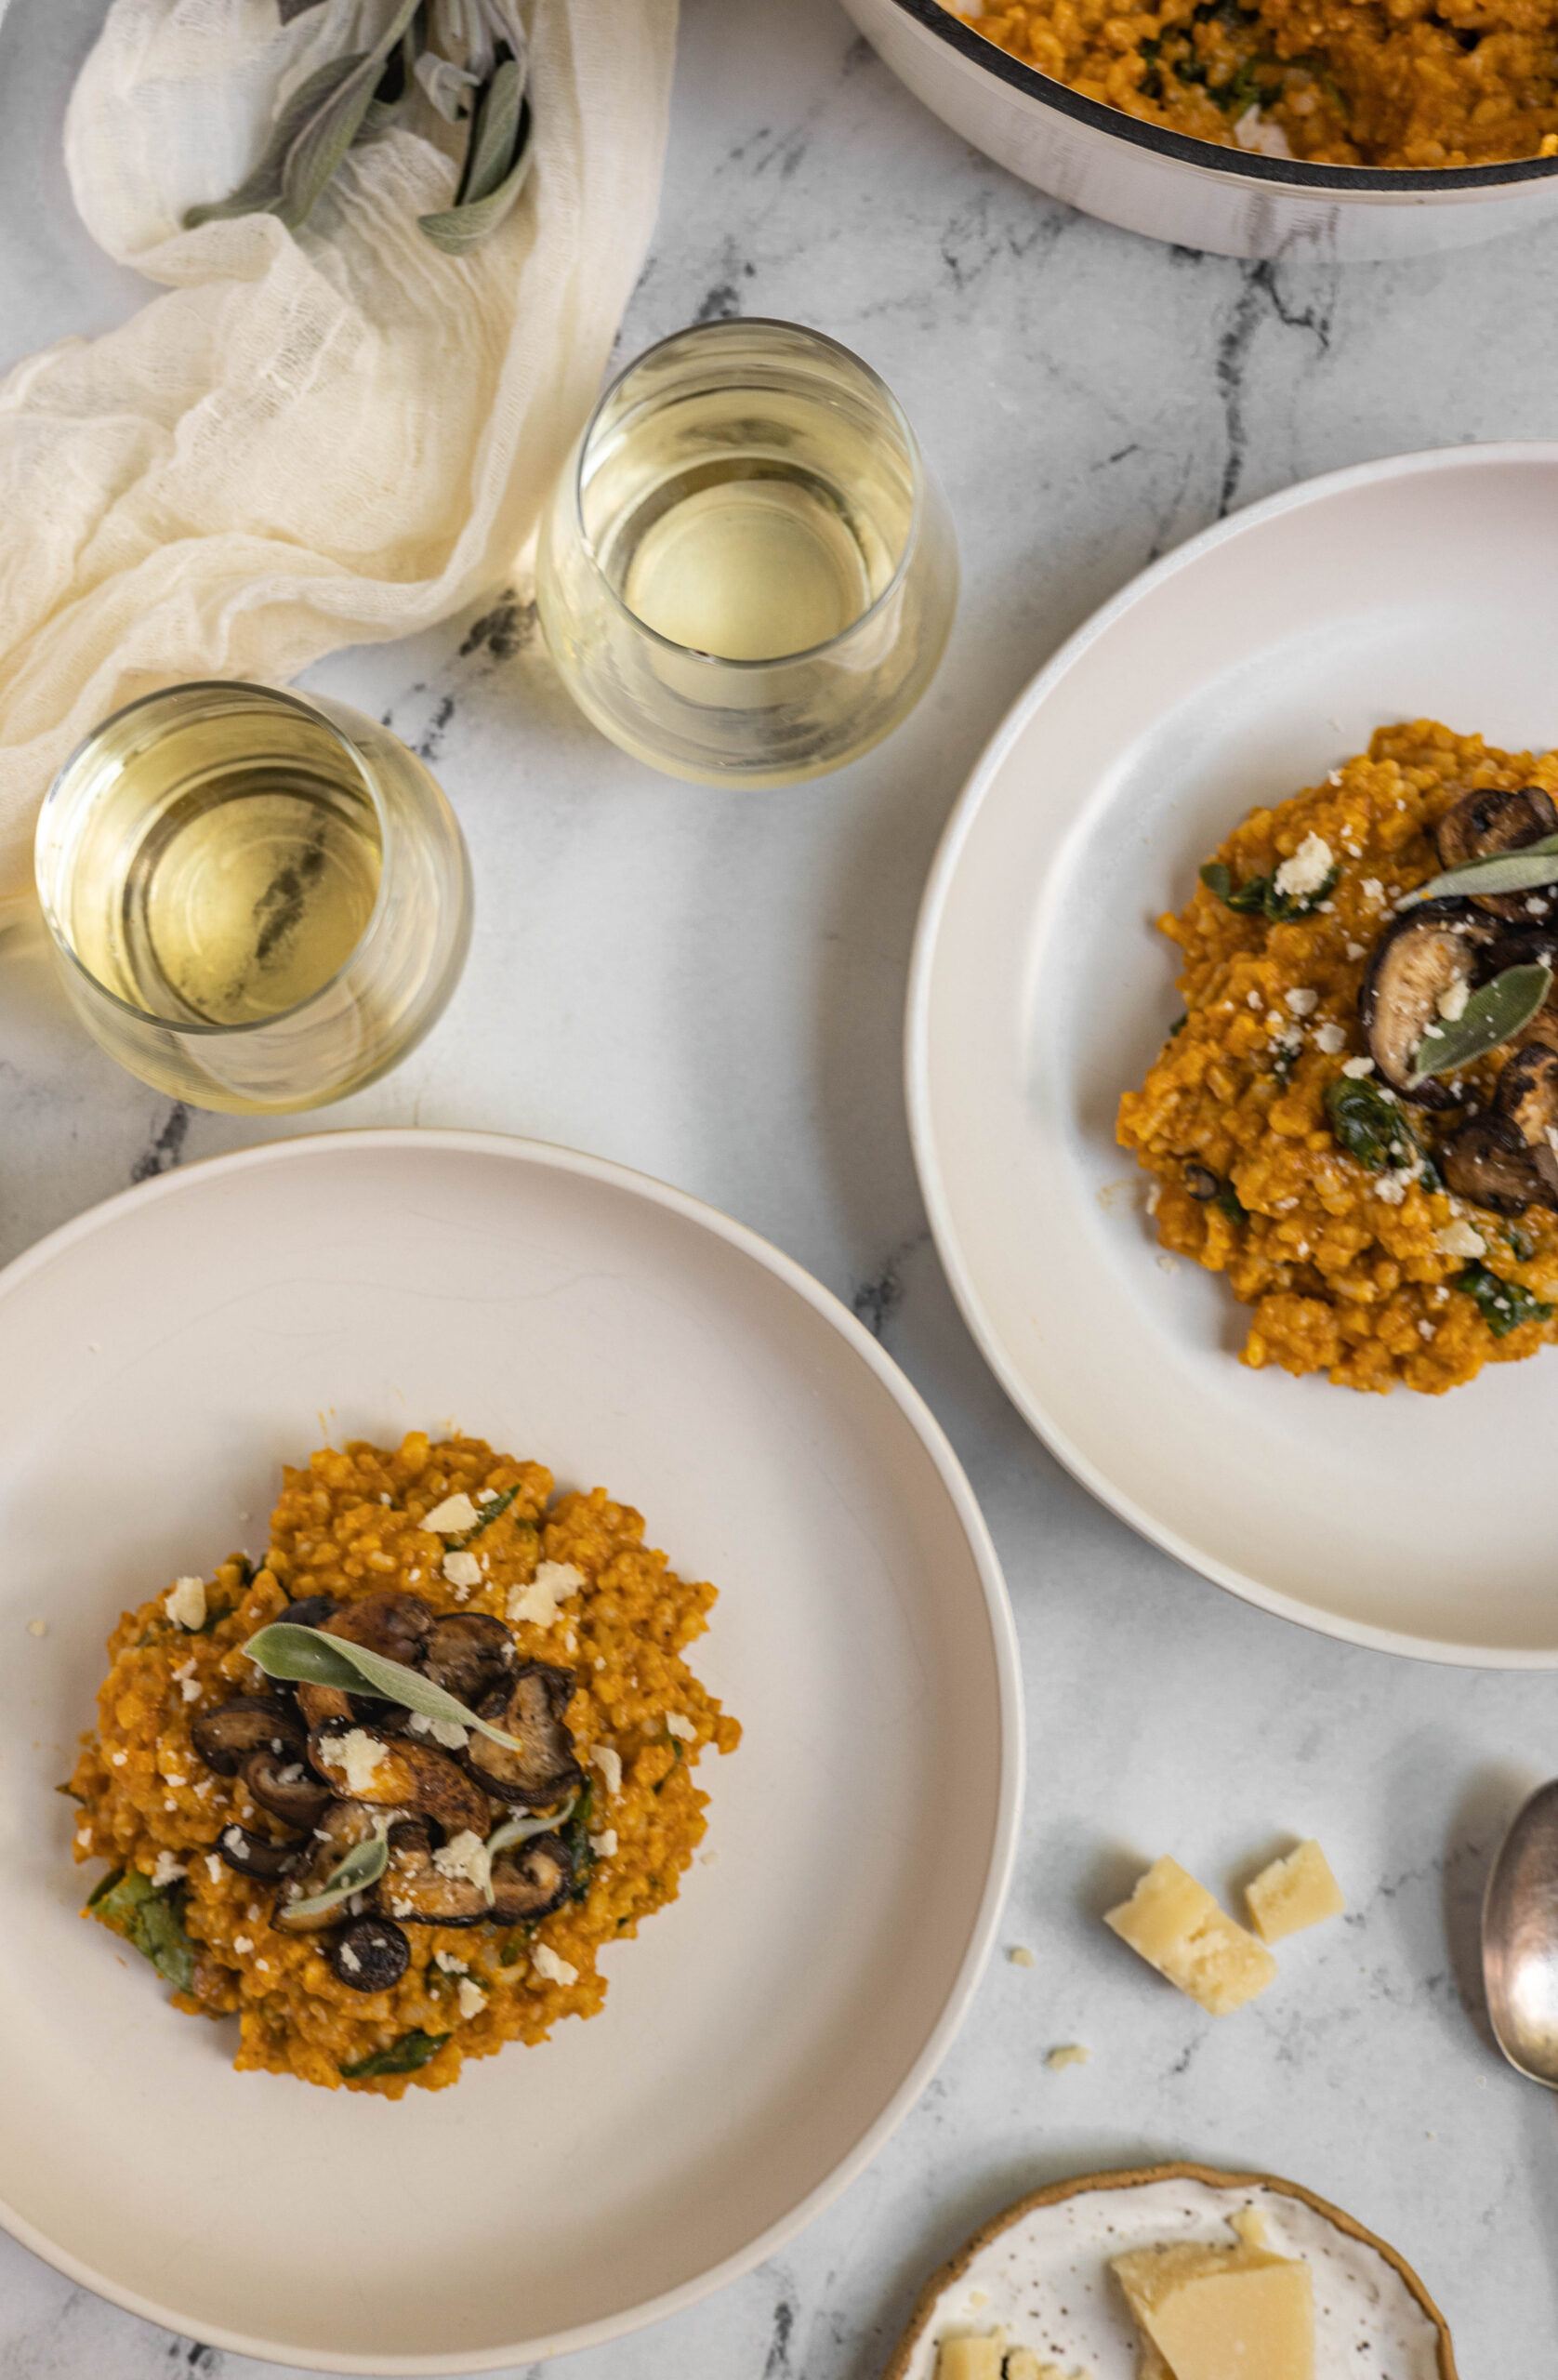 Table scape image of pumpkin and mushroom risotto.